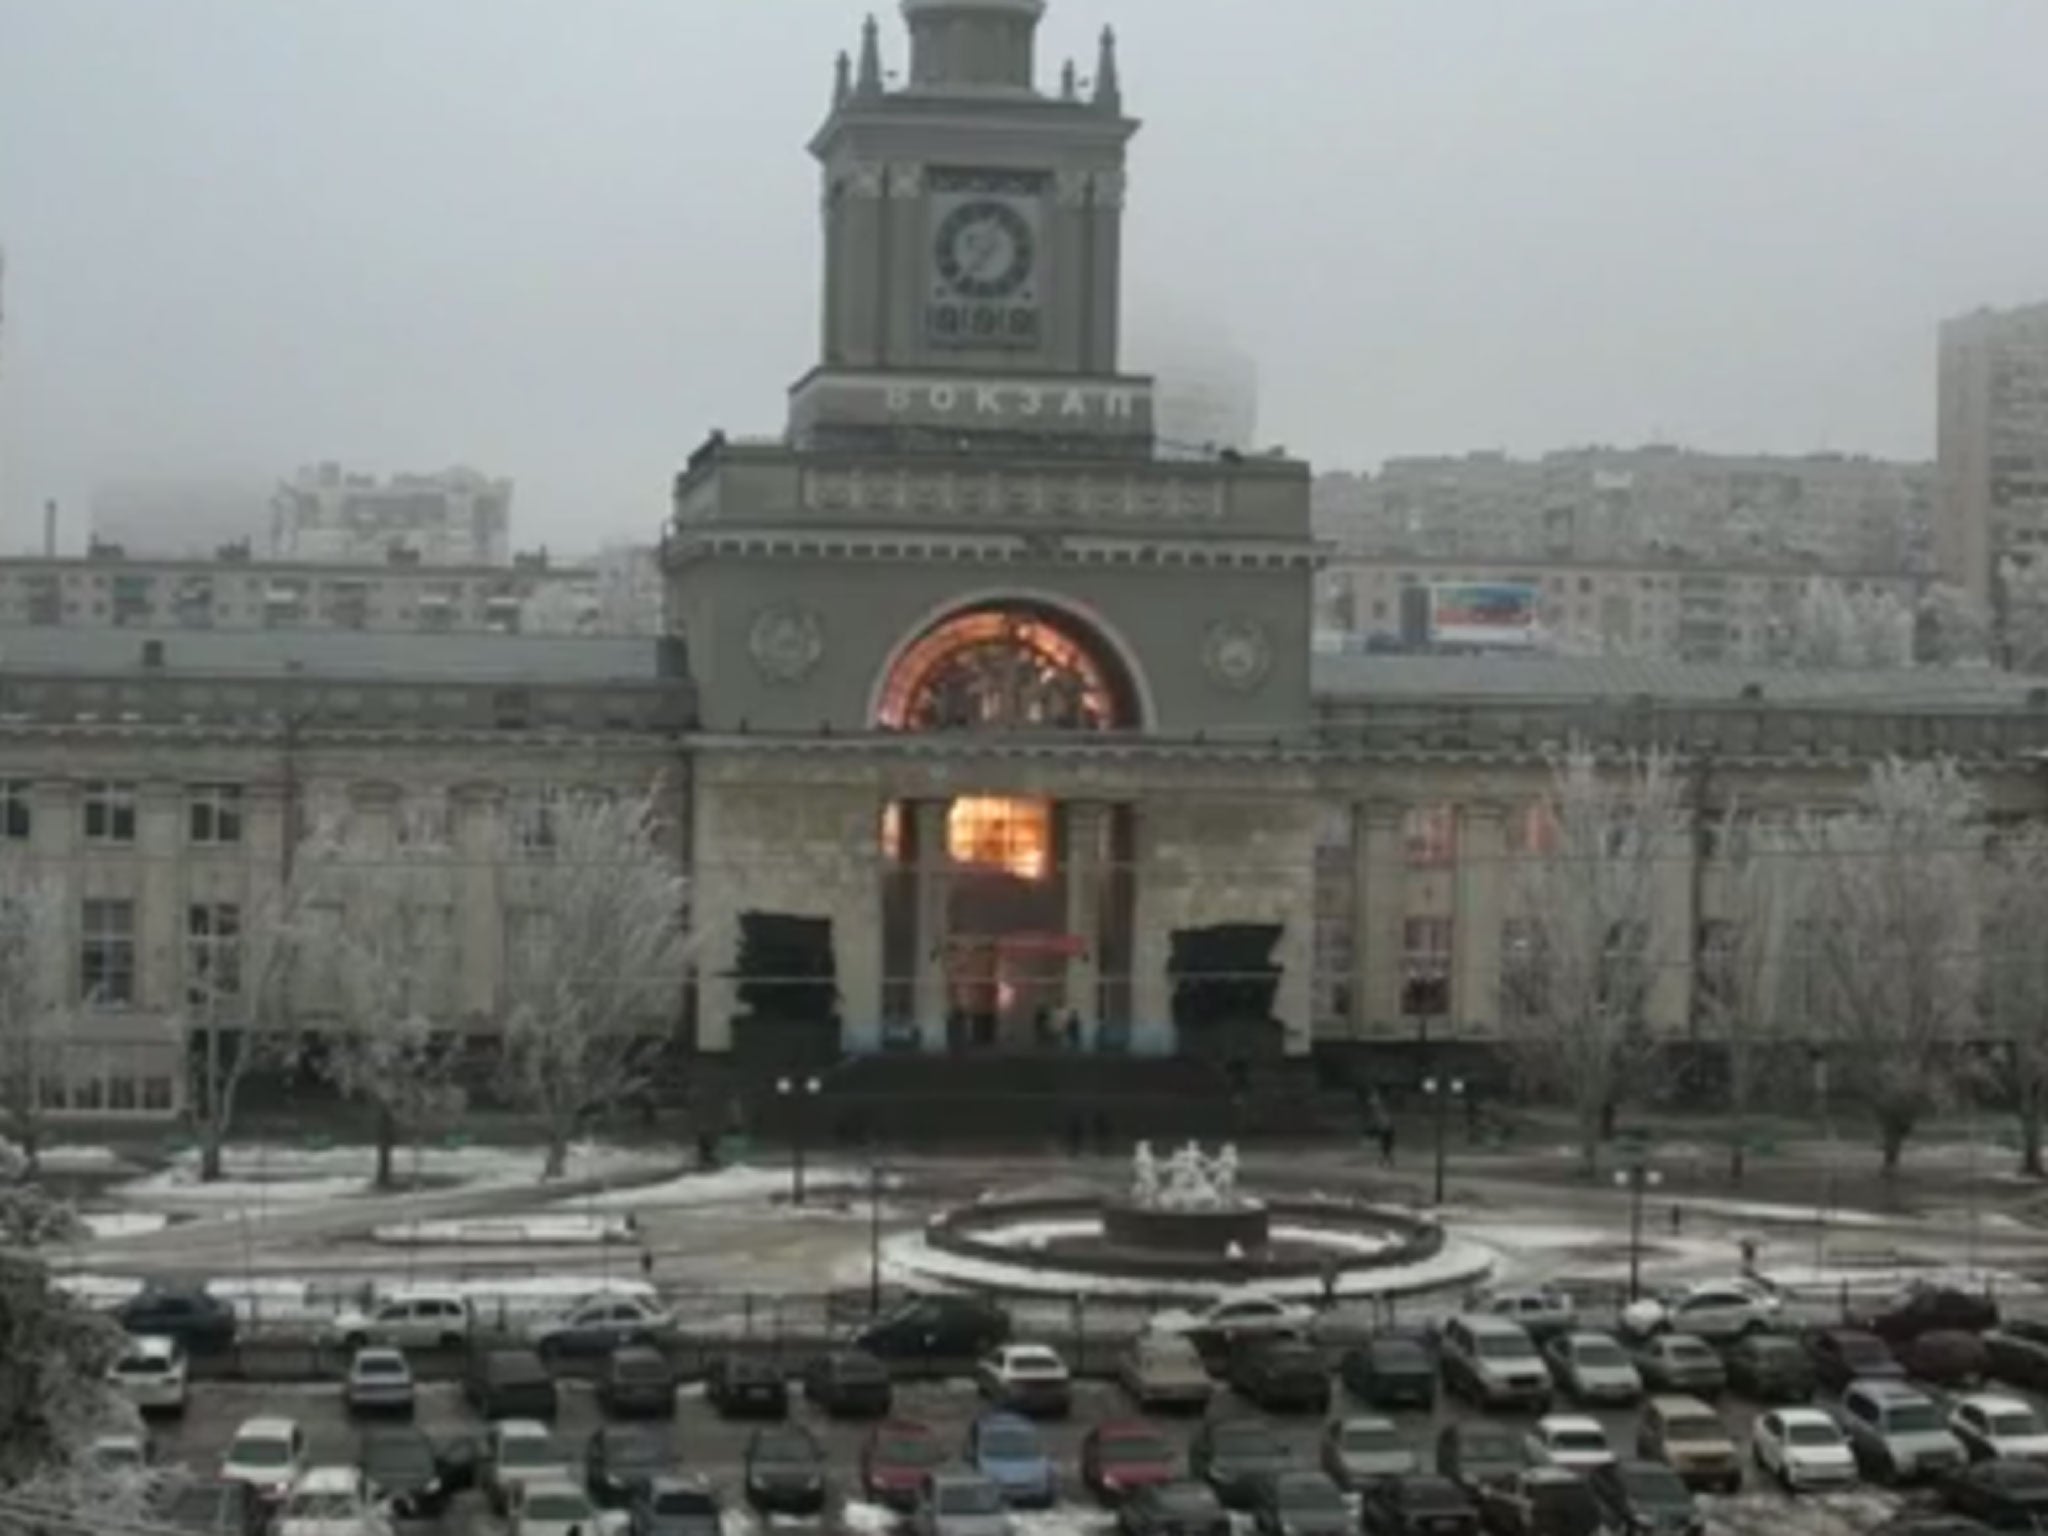 Footage captures the moment a suspected suicide bomber struck the central station of the southern Russian city Volgograd